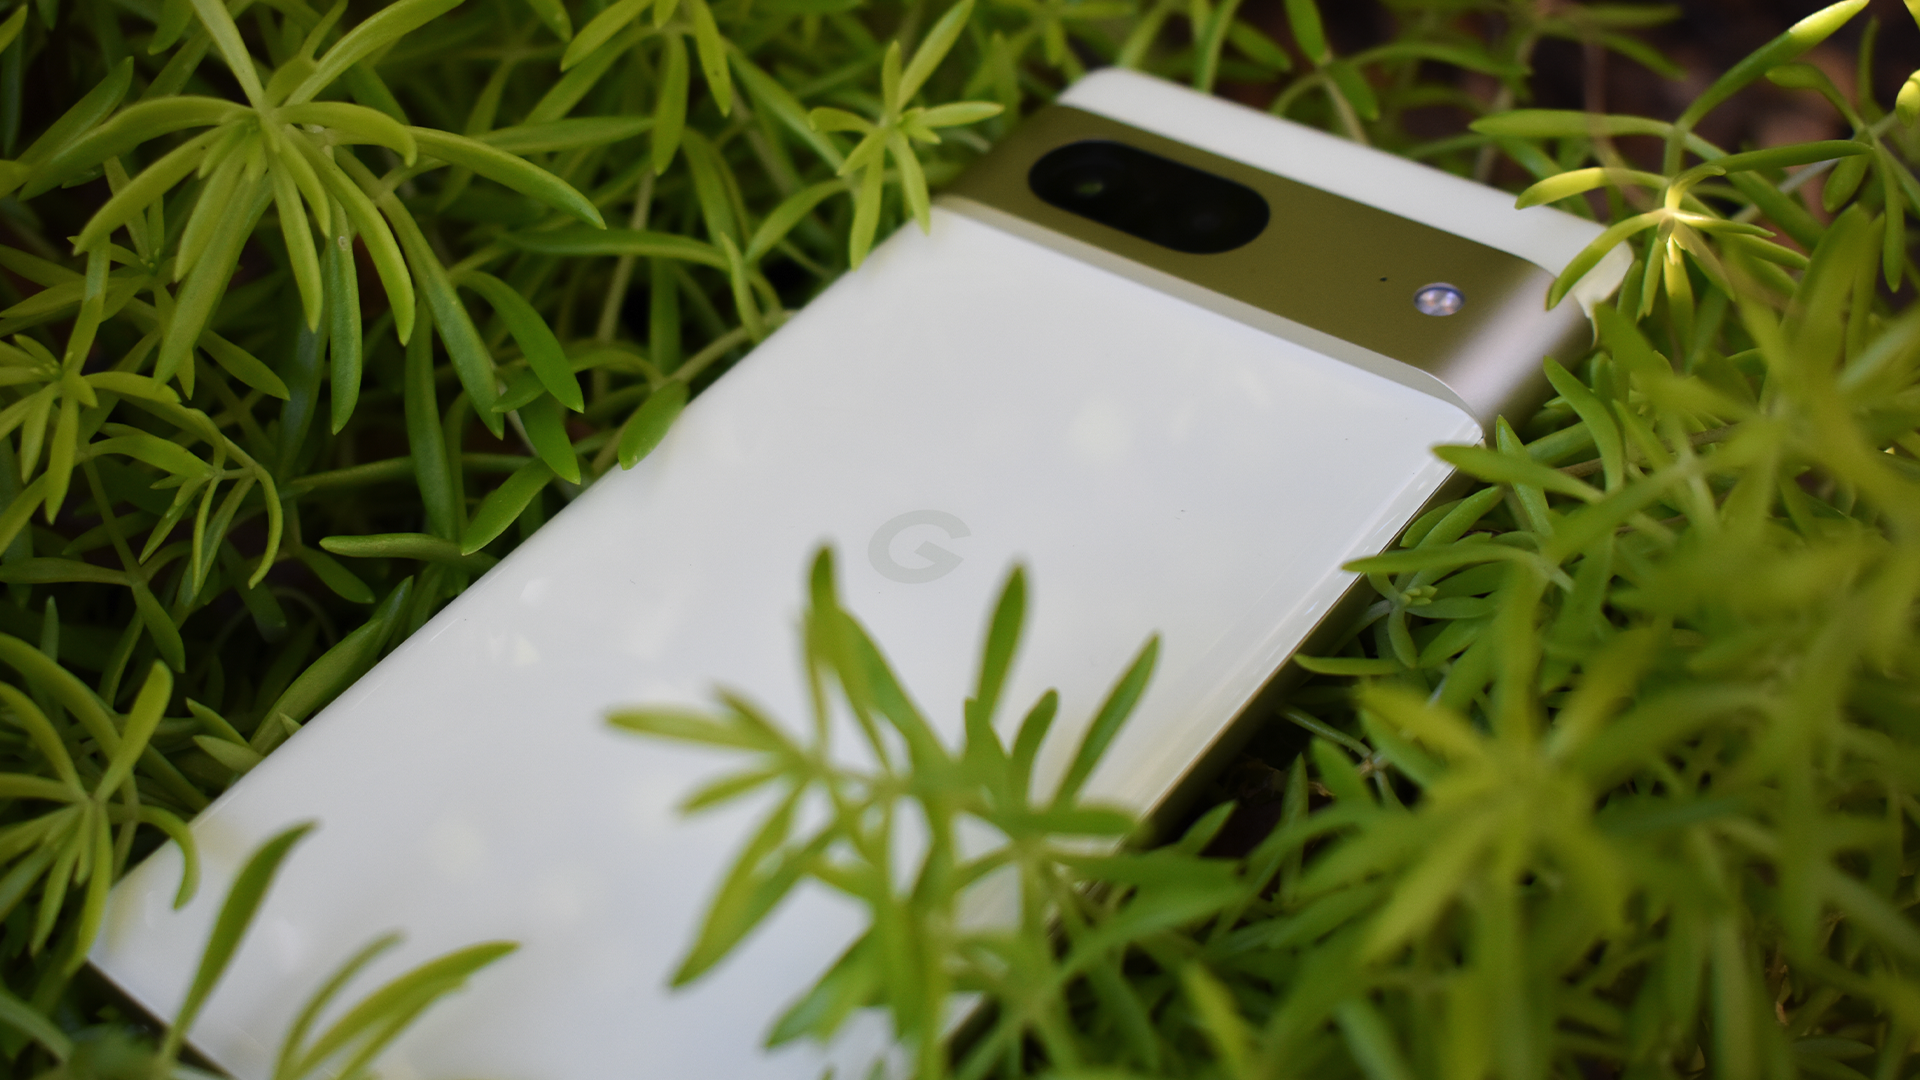 A blurry photo of the Google Pixel 7 in a plush looking, grassy plant.